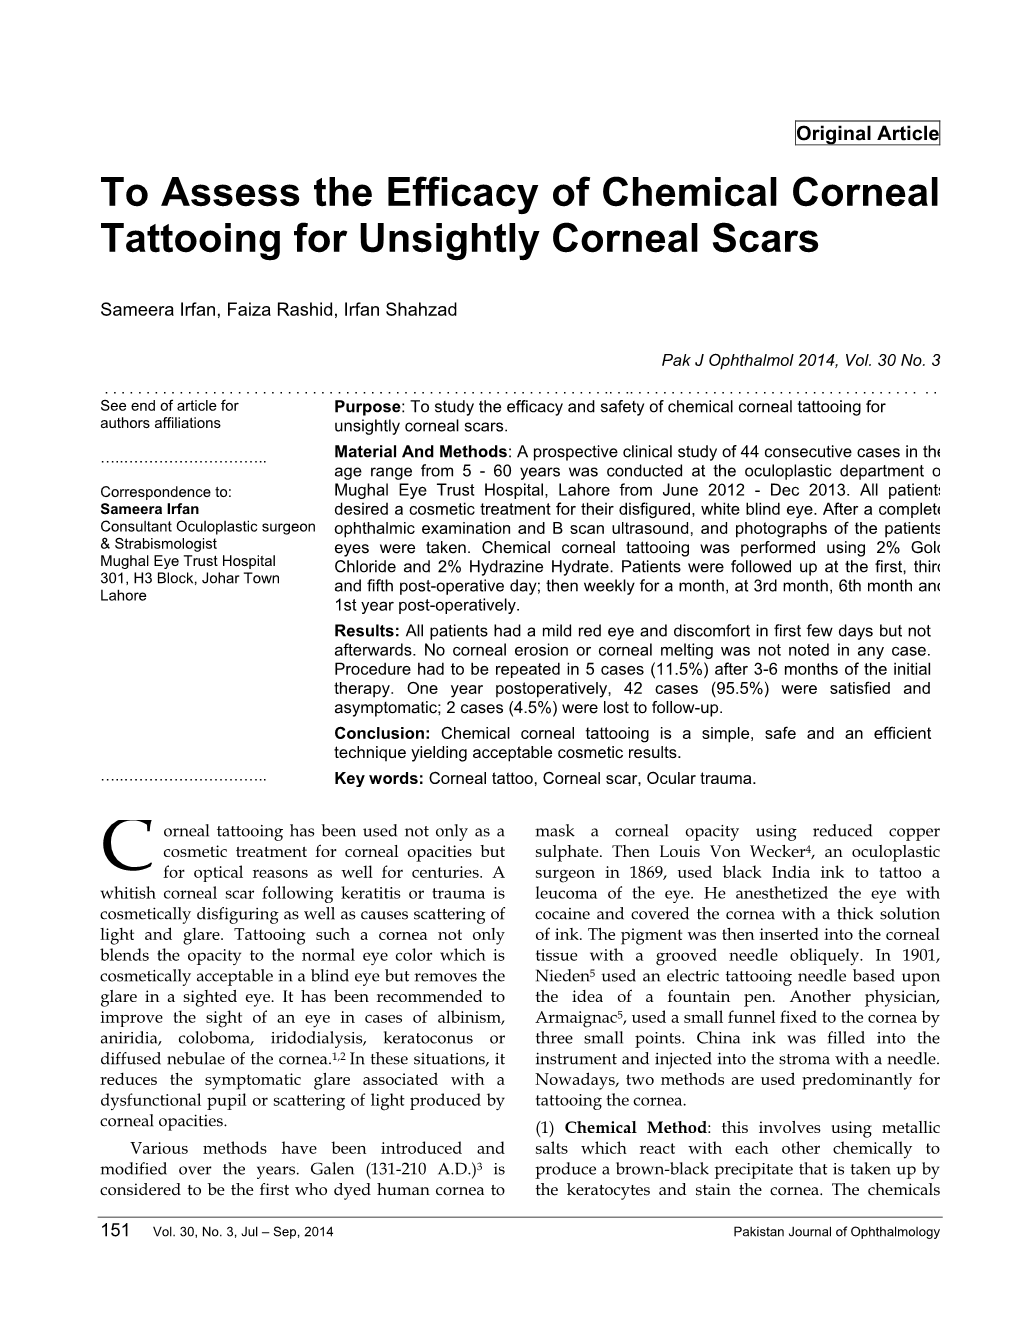 To Assess the Efficacy of Chemical Corneal Tattooing for Unsightly Corneal Scars